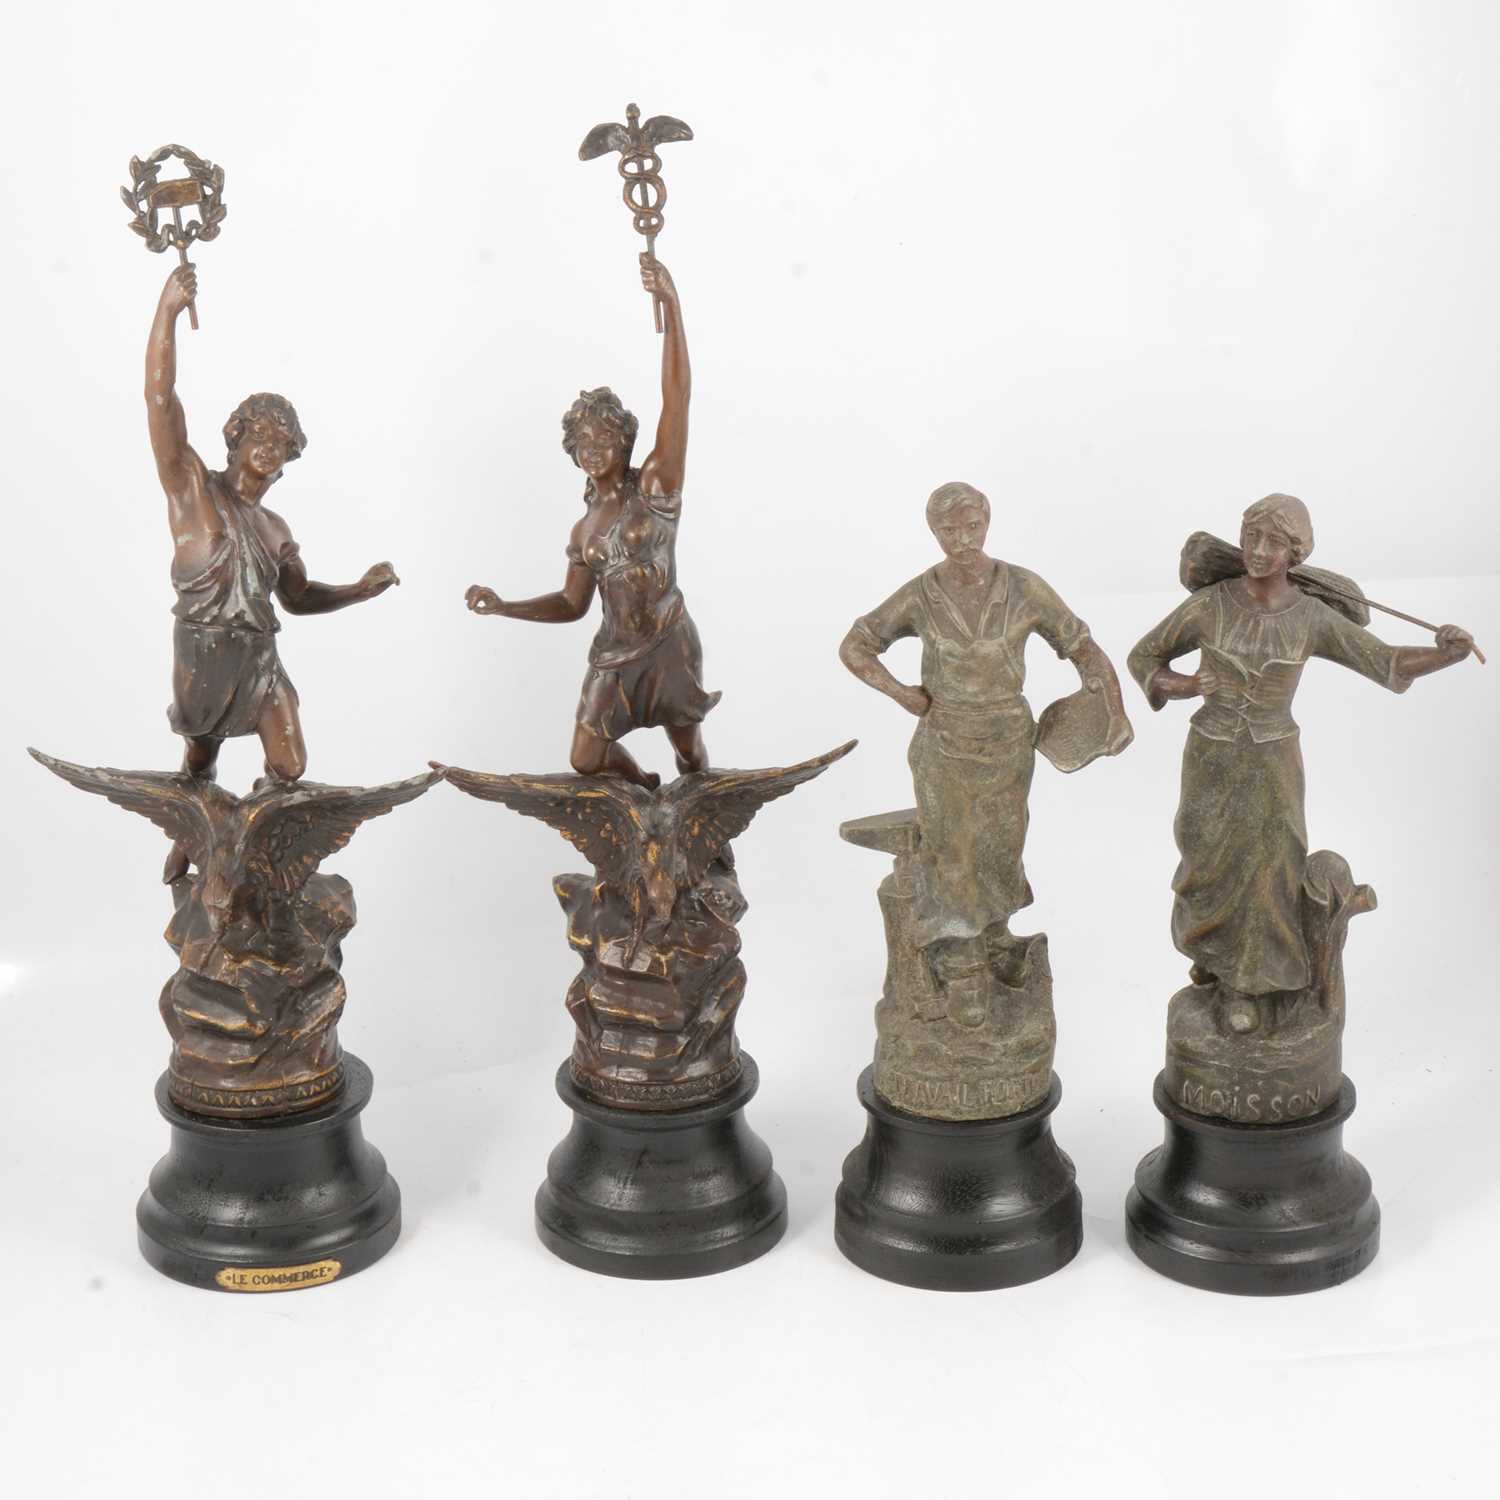 Lot 101 - Pair of spelter figures, Commerce & Industry, and another smaller pair of spelter figures